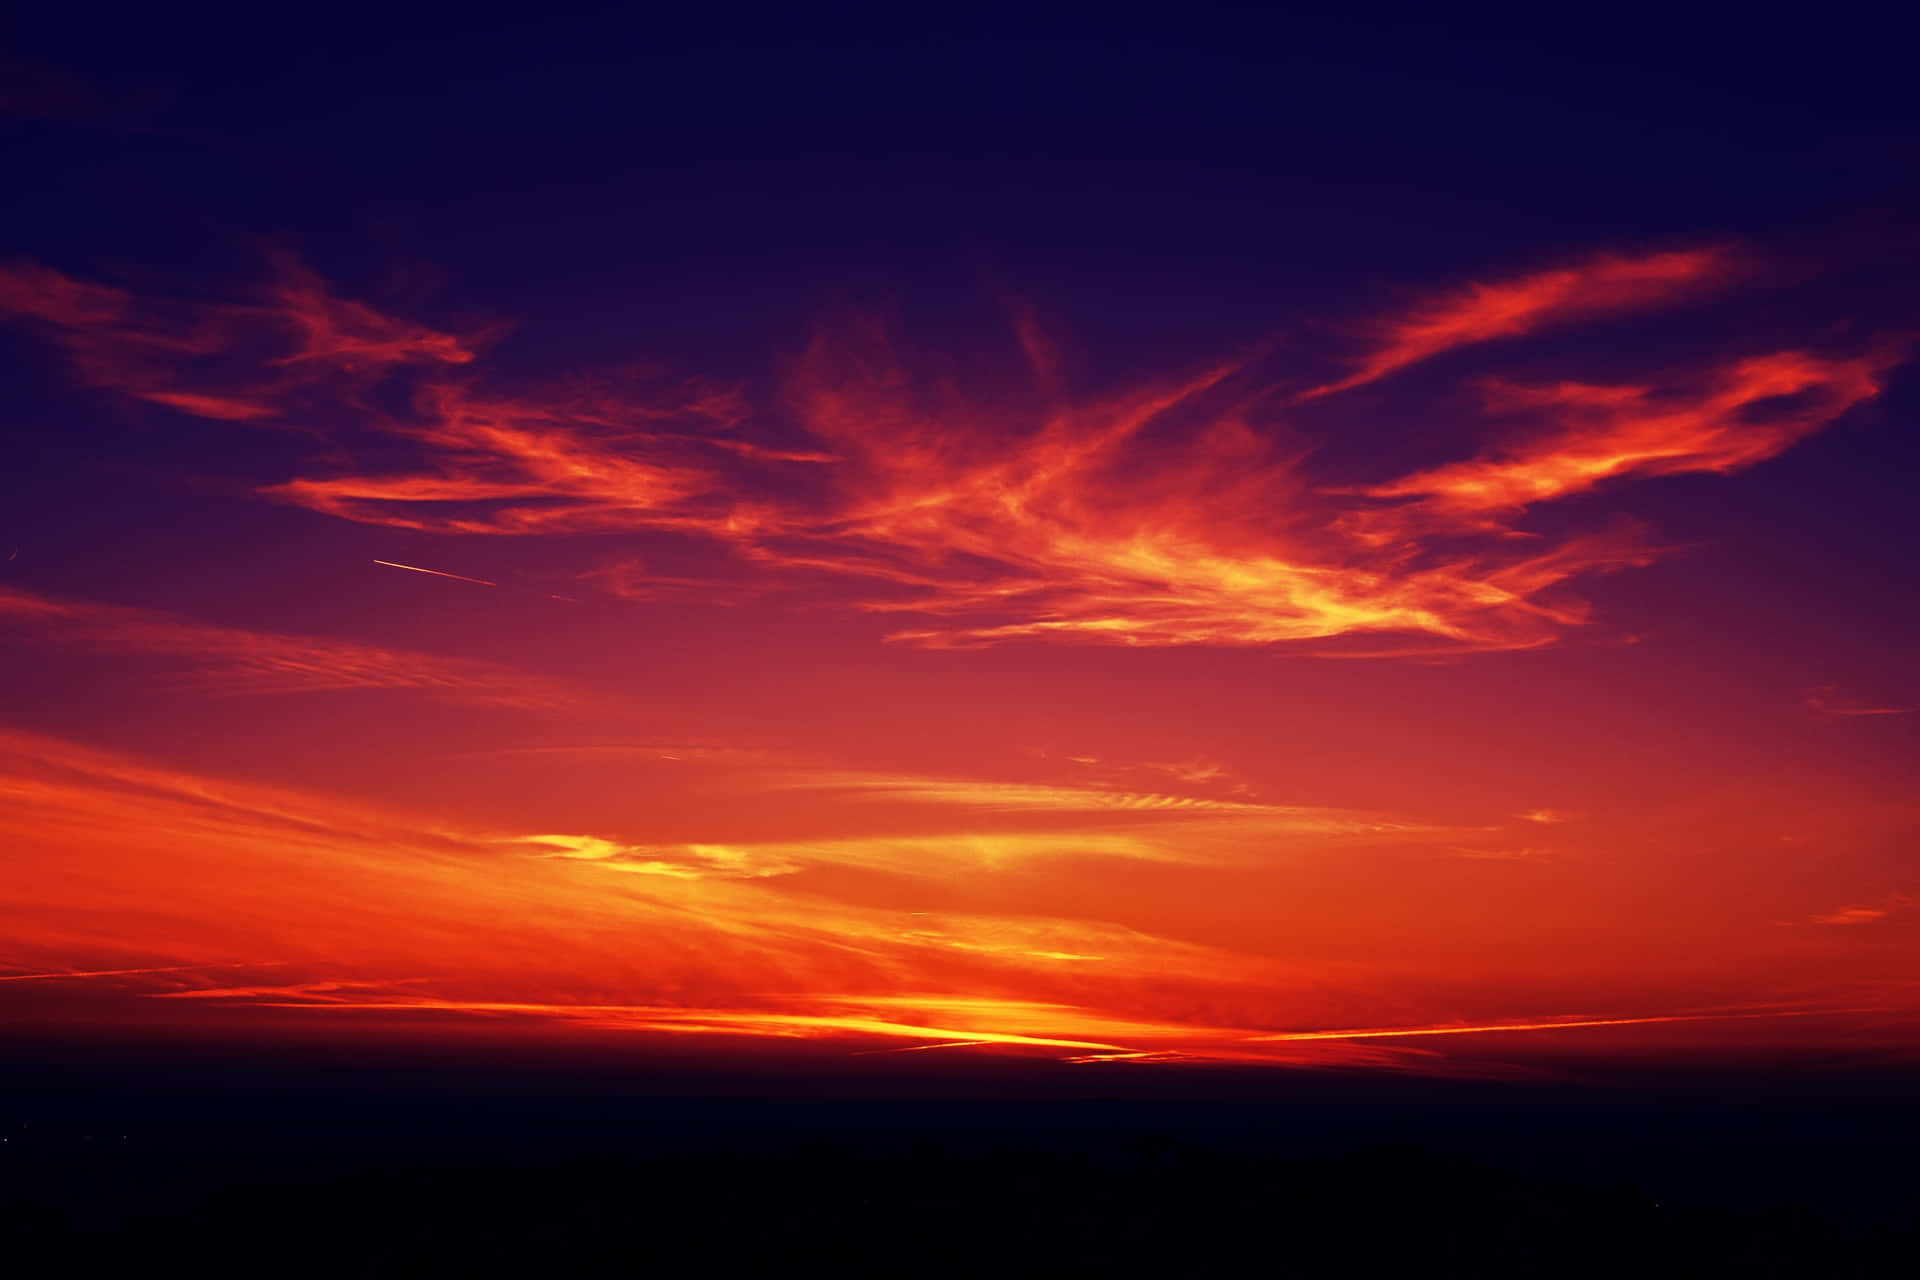 100+] Red Sunset Wallpapers